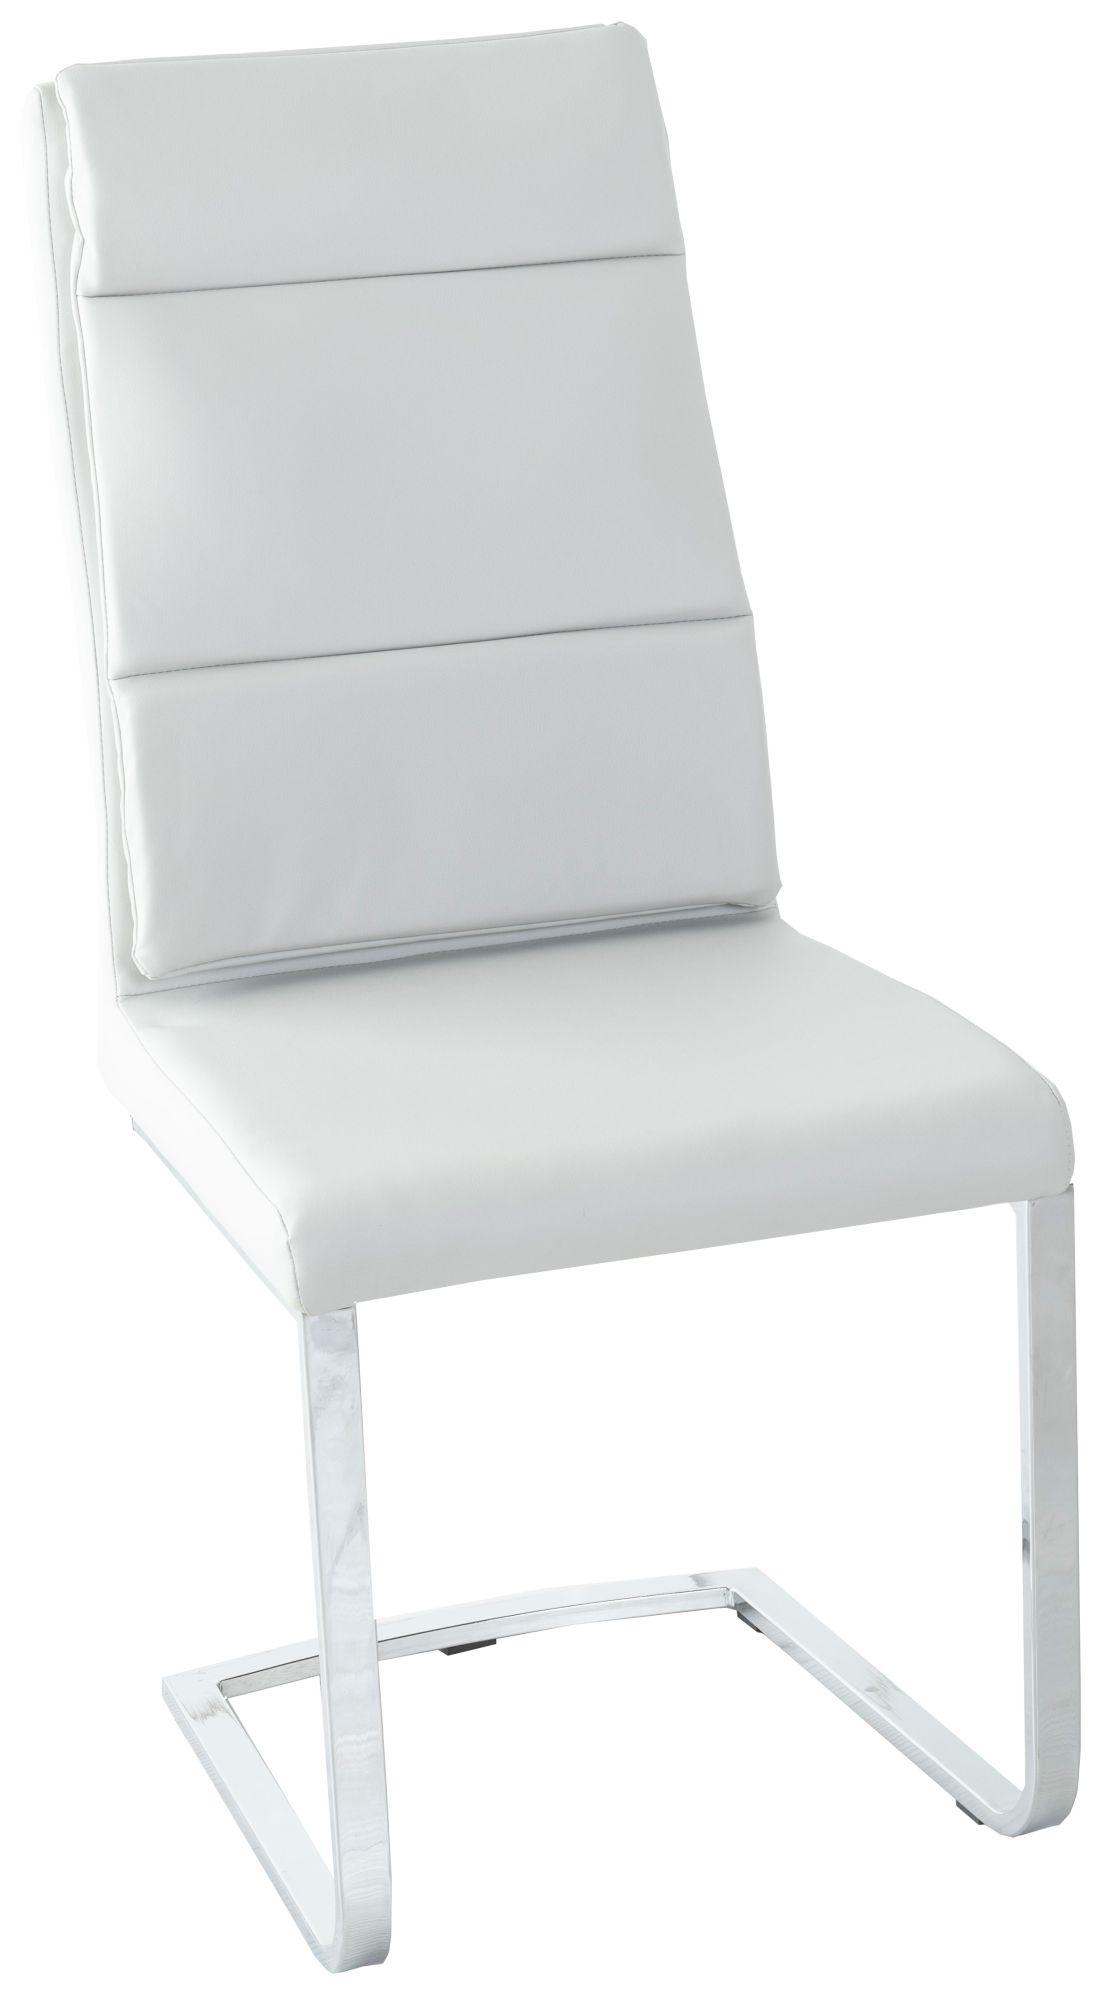 Arabella Grey Dining Chair, Leather - Faux PU with Stainless Steel Chrome Cantiliver Base